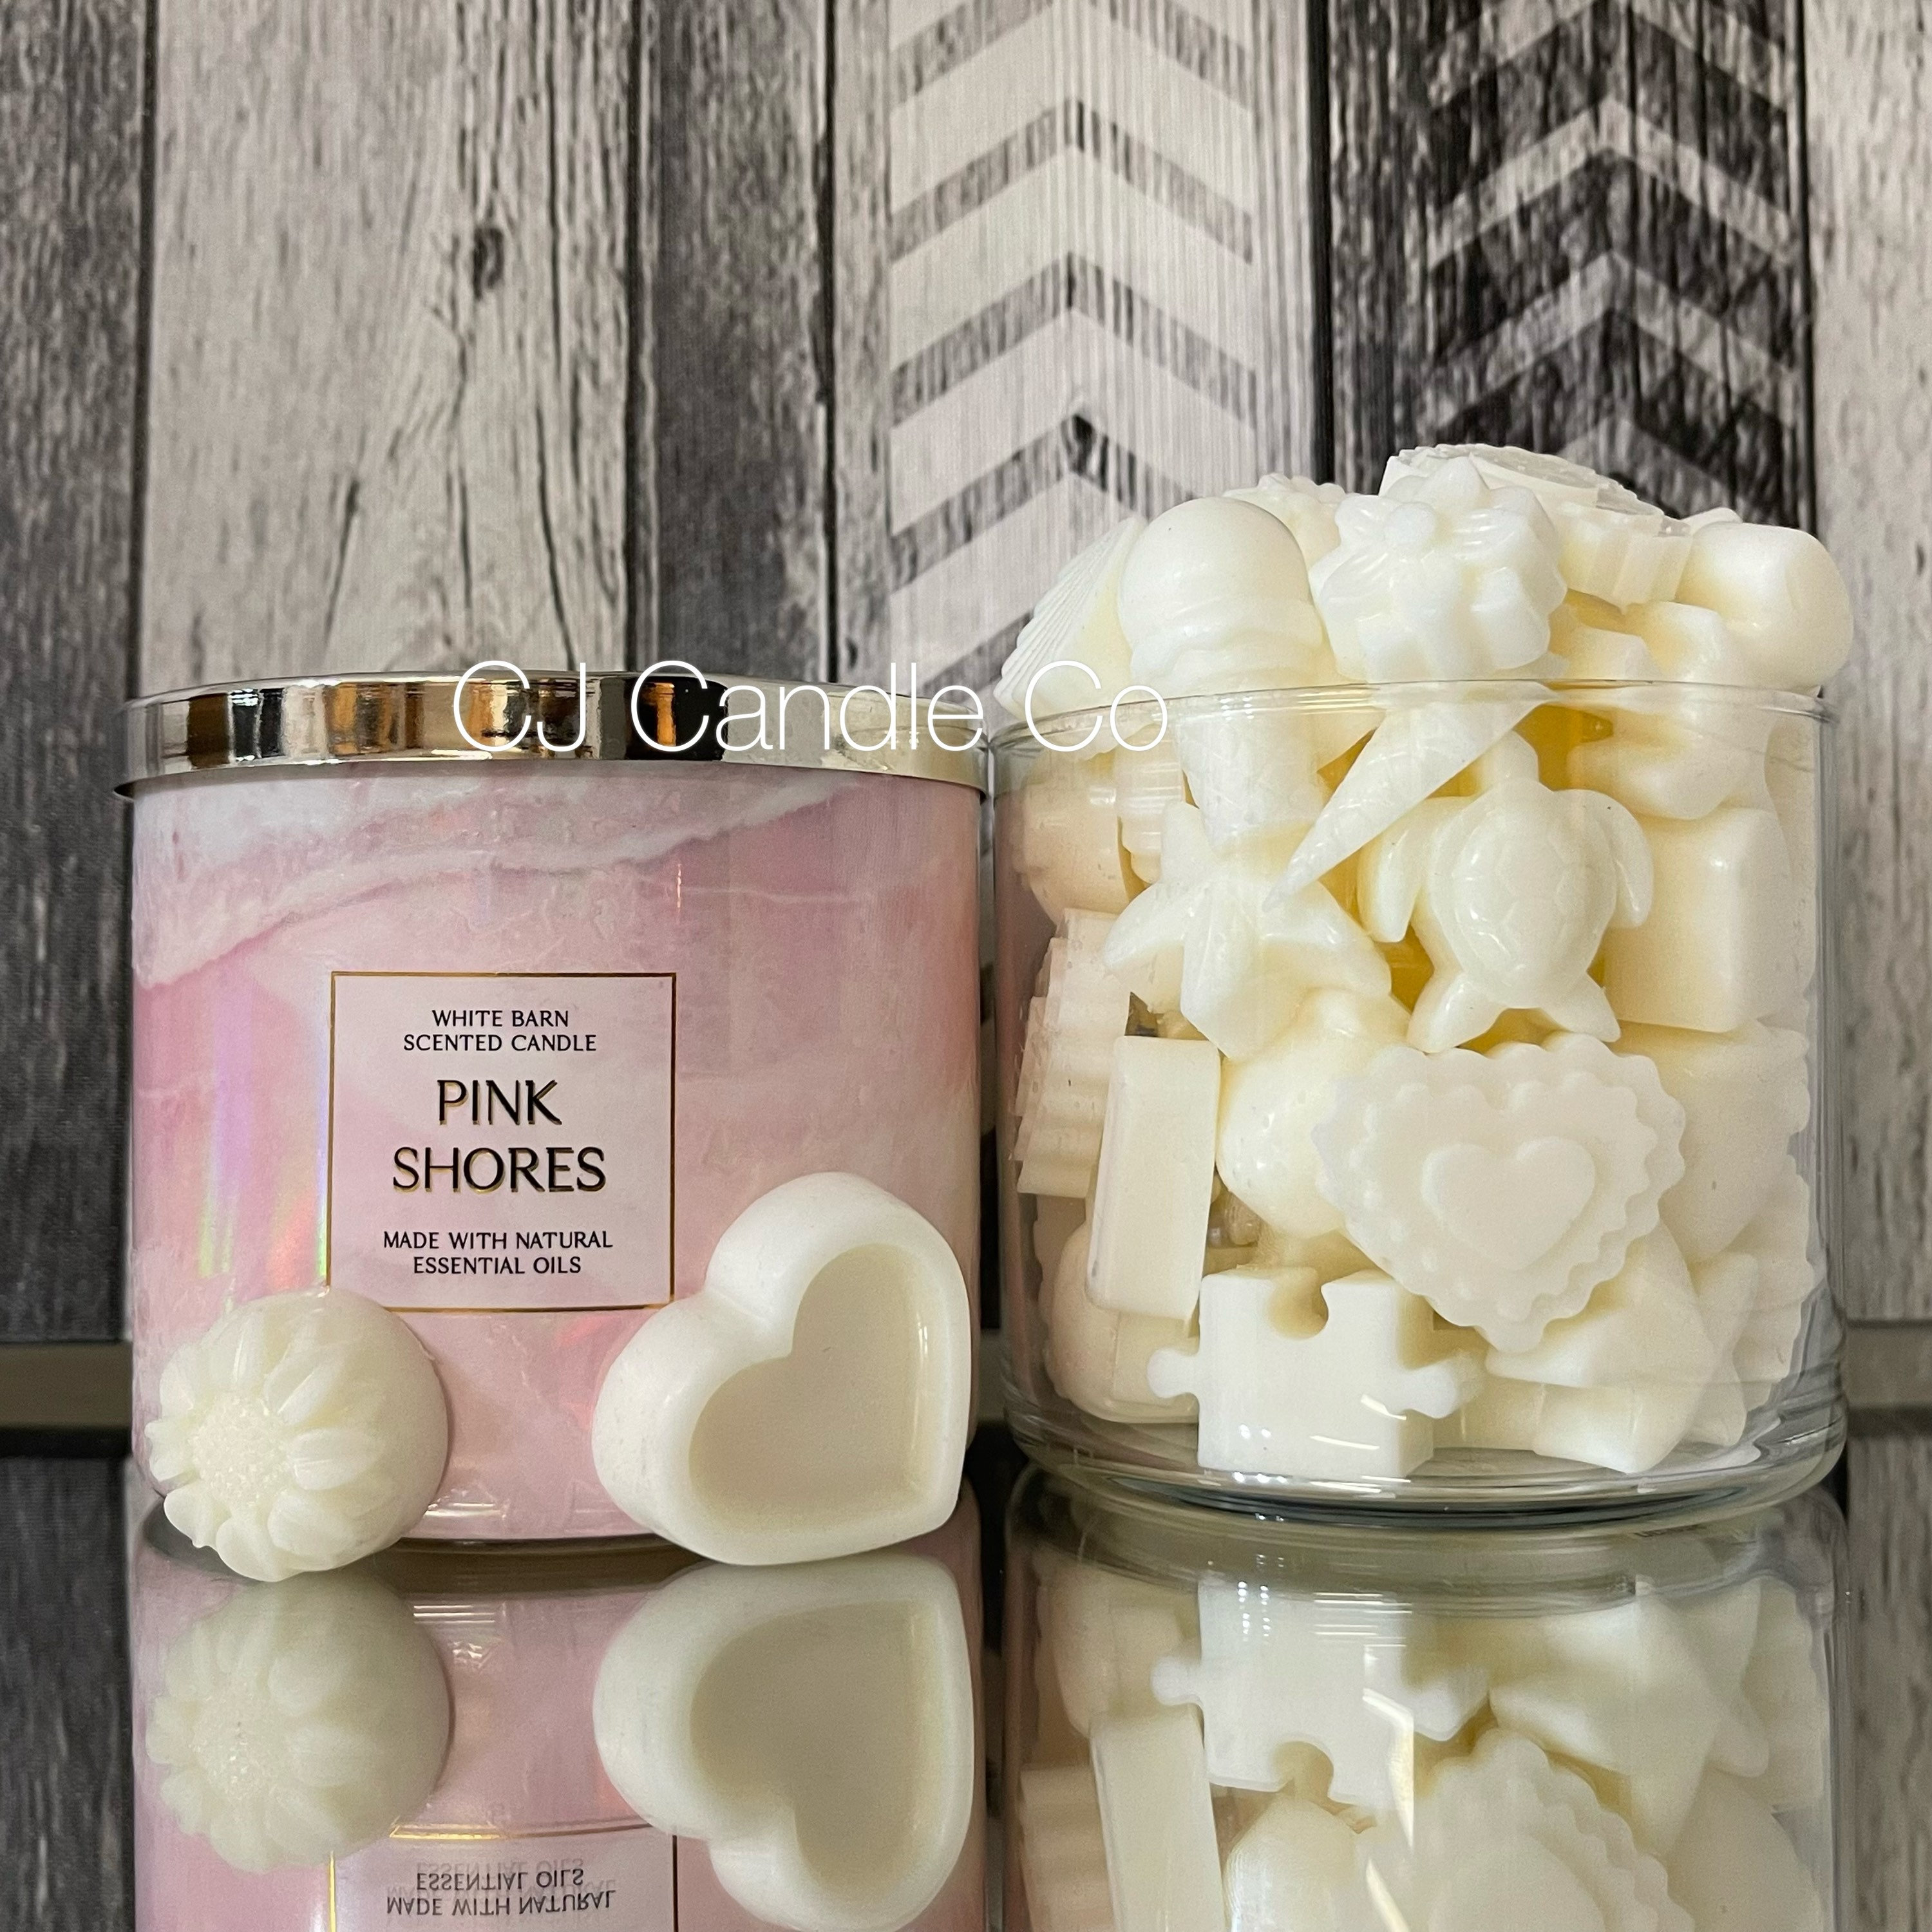 Black Tie Bath & Body Works Candle Wax Melts BBW Wax Melts Perfect Gift for  Mom, Sister, Best Friend, Valentines, Anniversary 